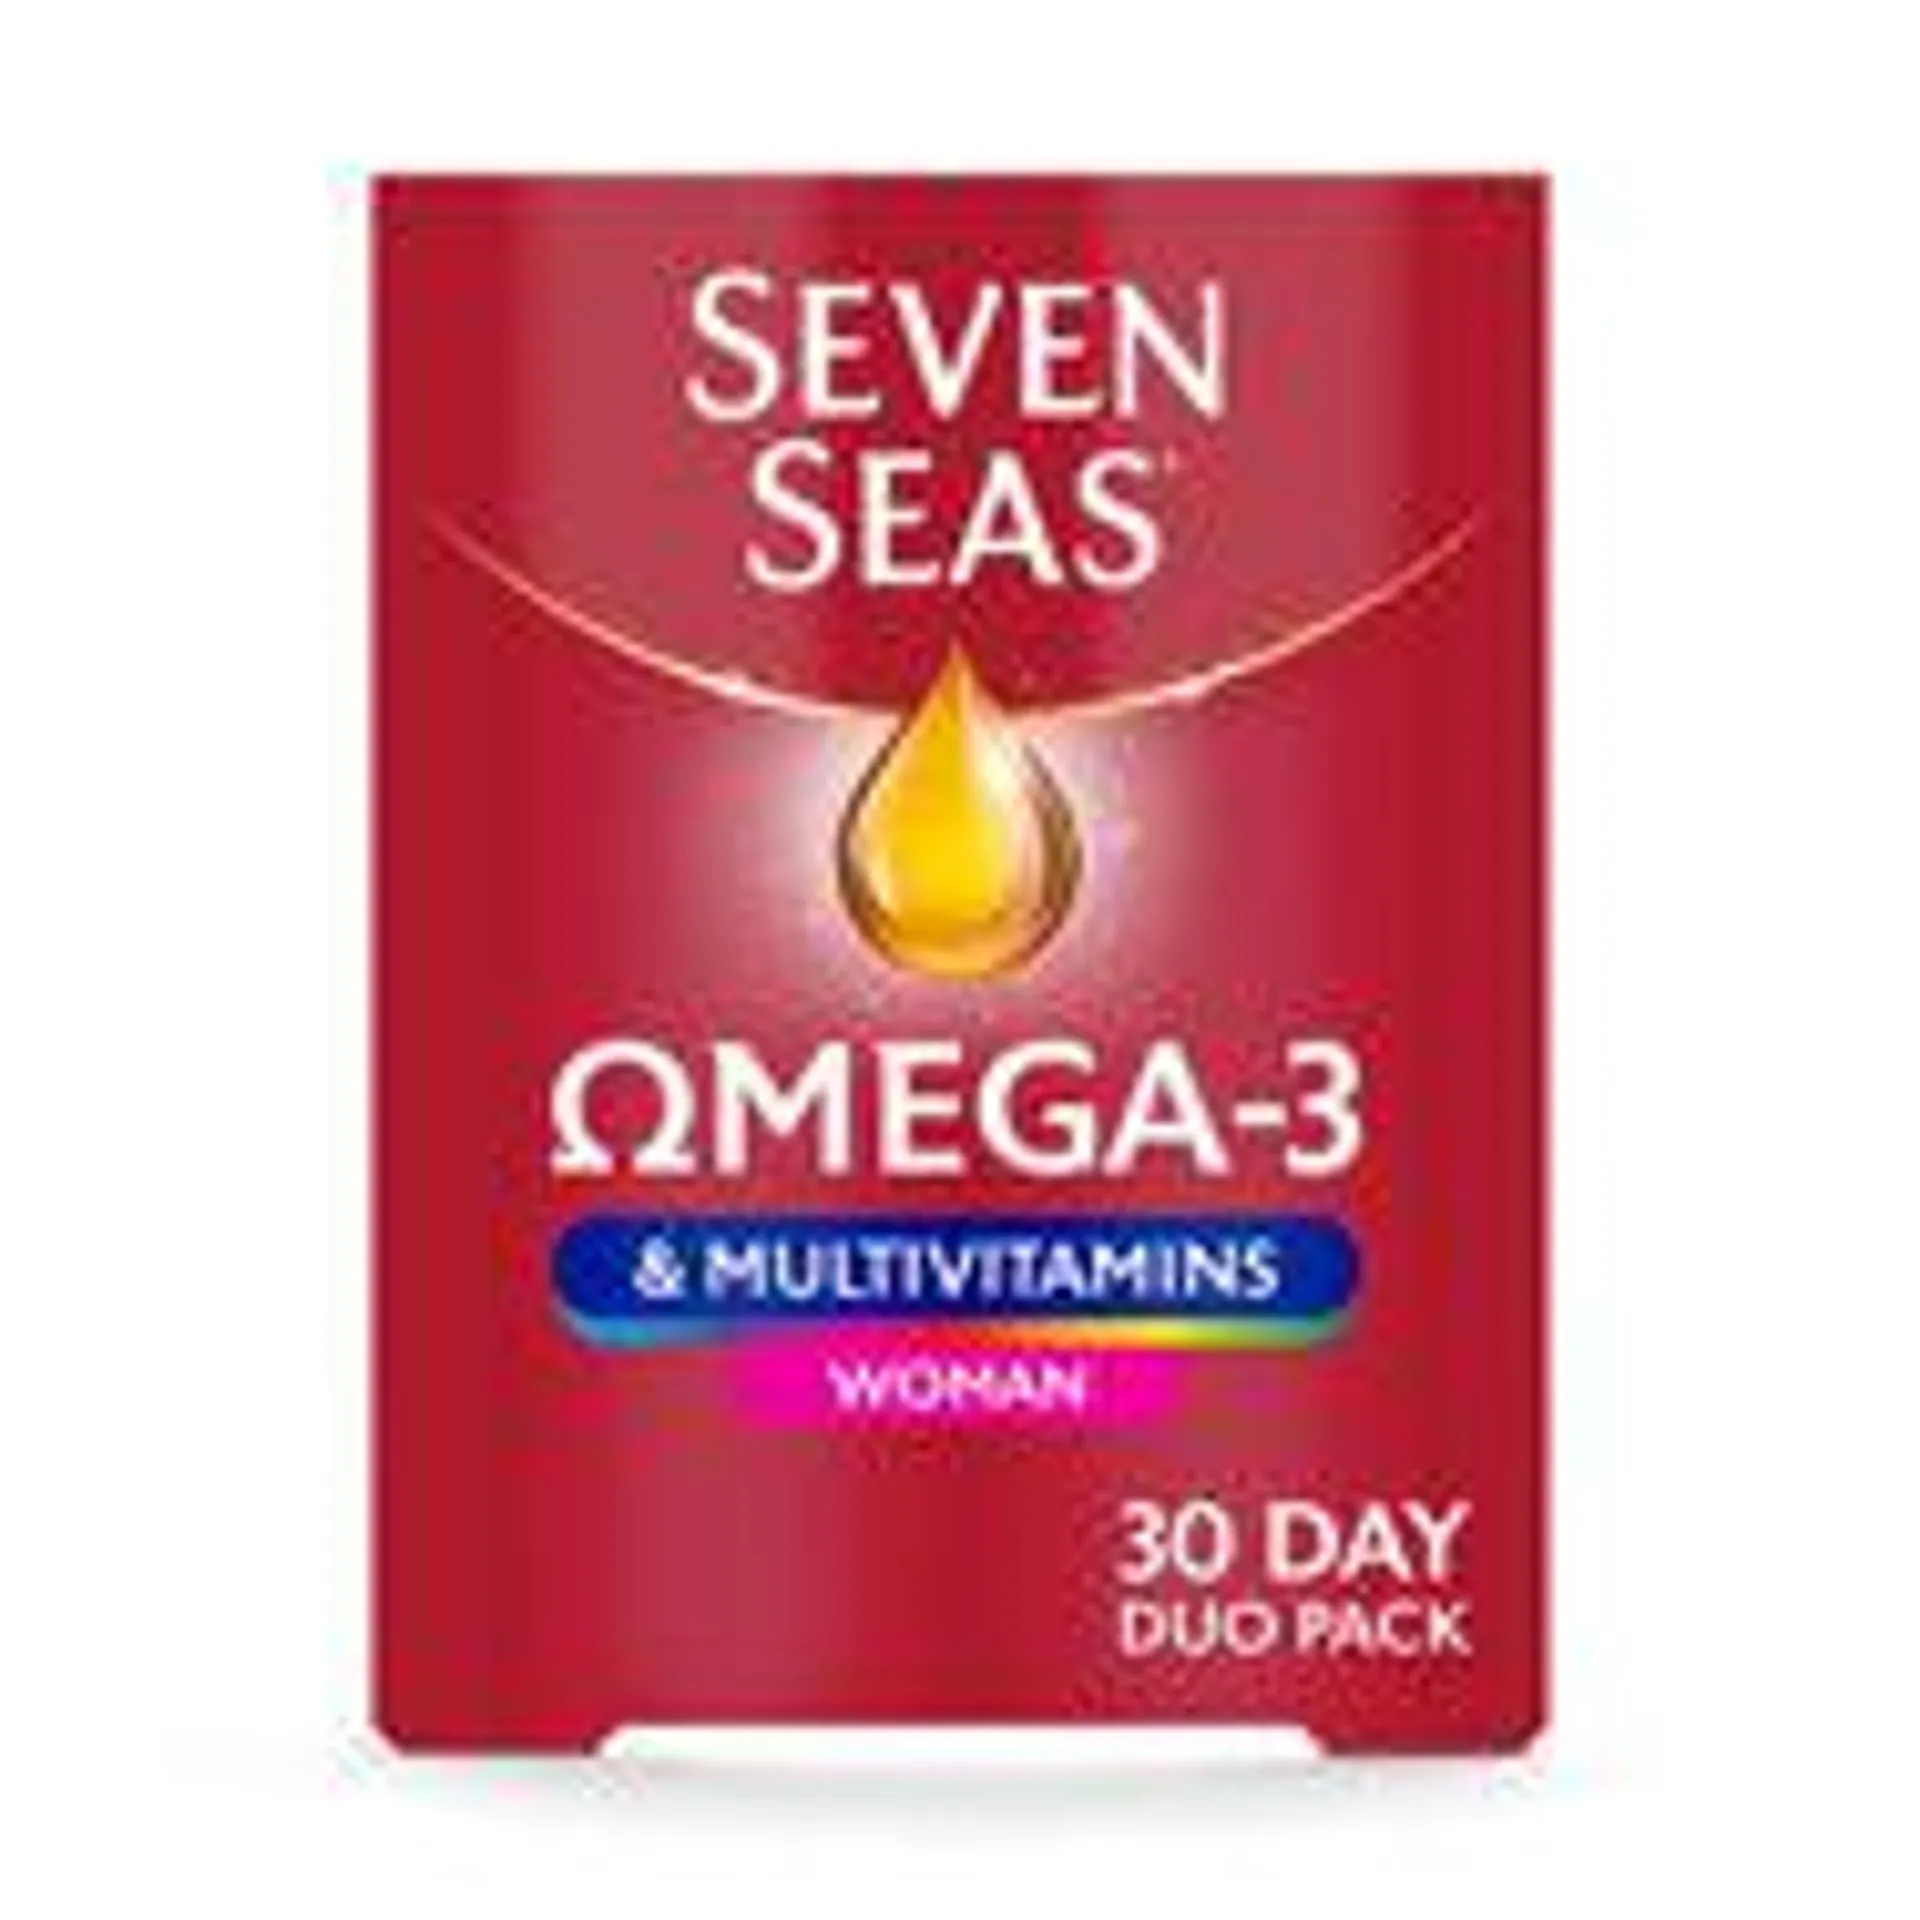 Seven Seas Omega-3 & Multivitamins Woman 30 Day 60 Capsules/Tablets Duo Pack